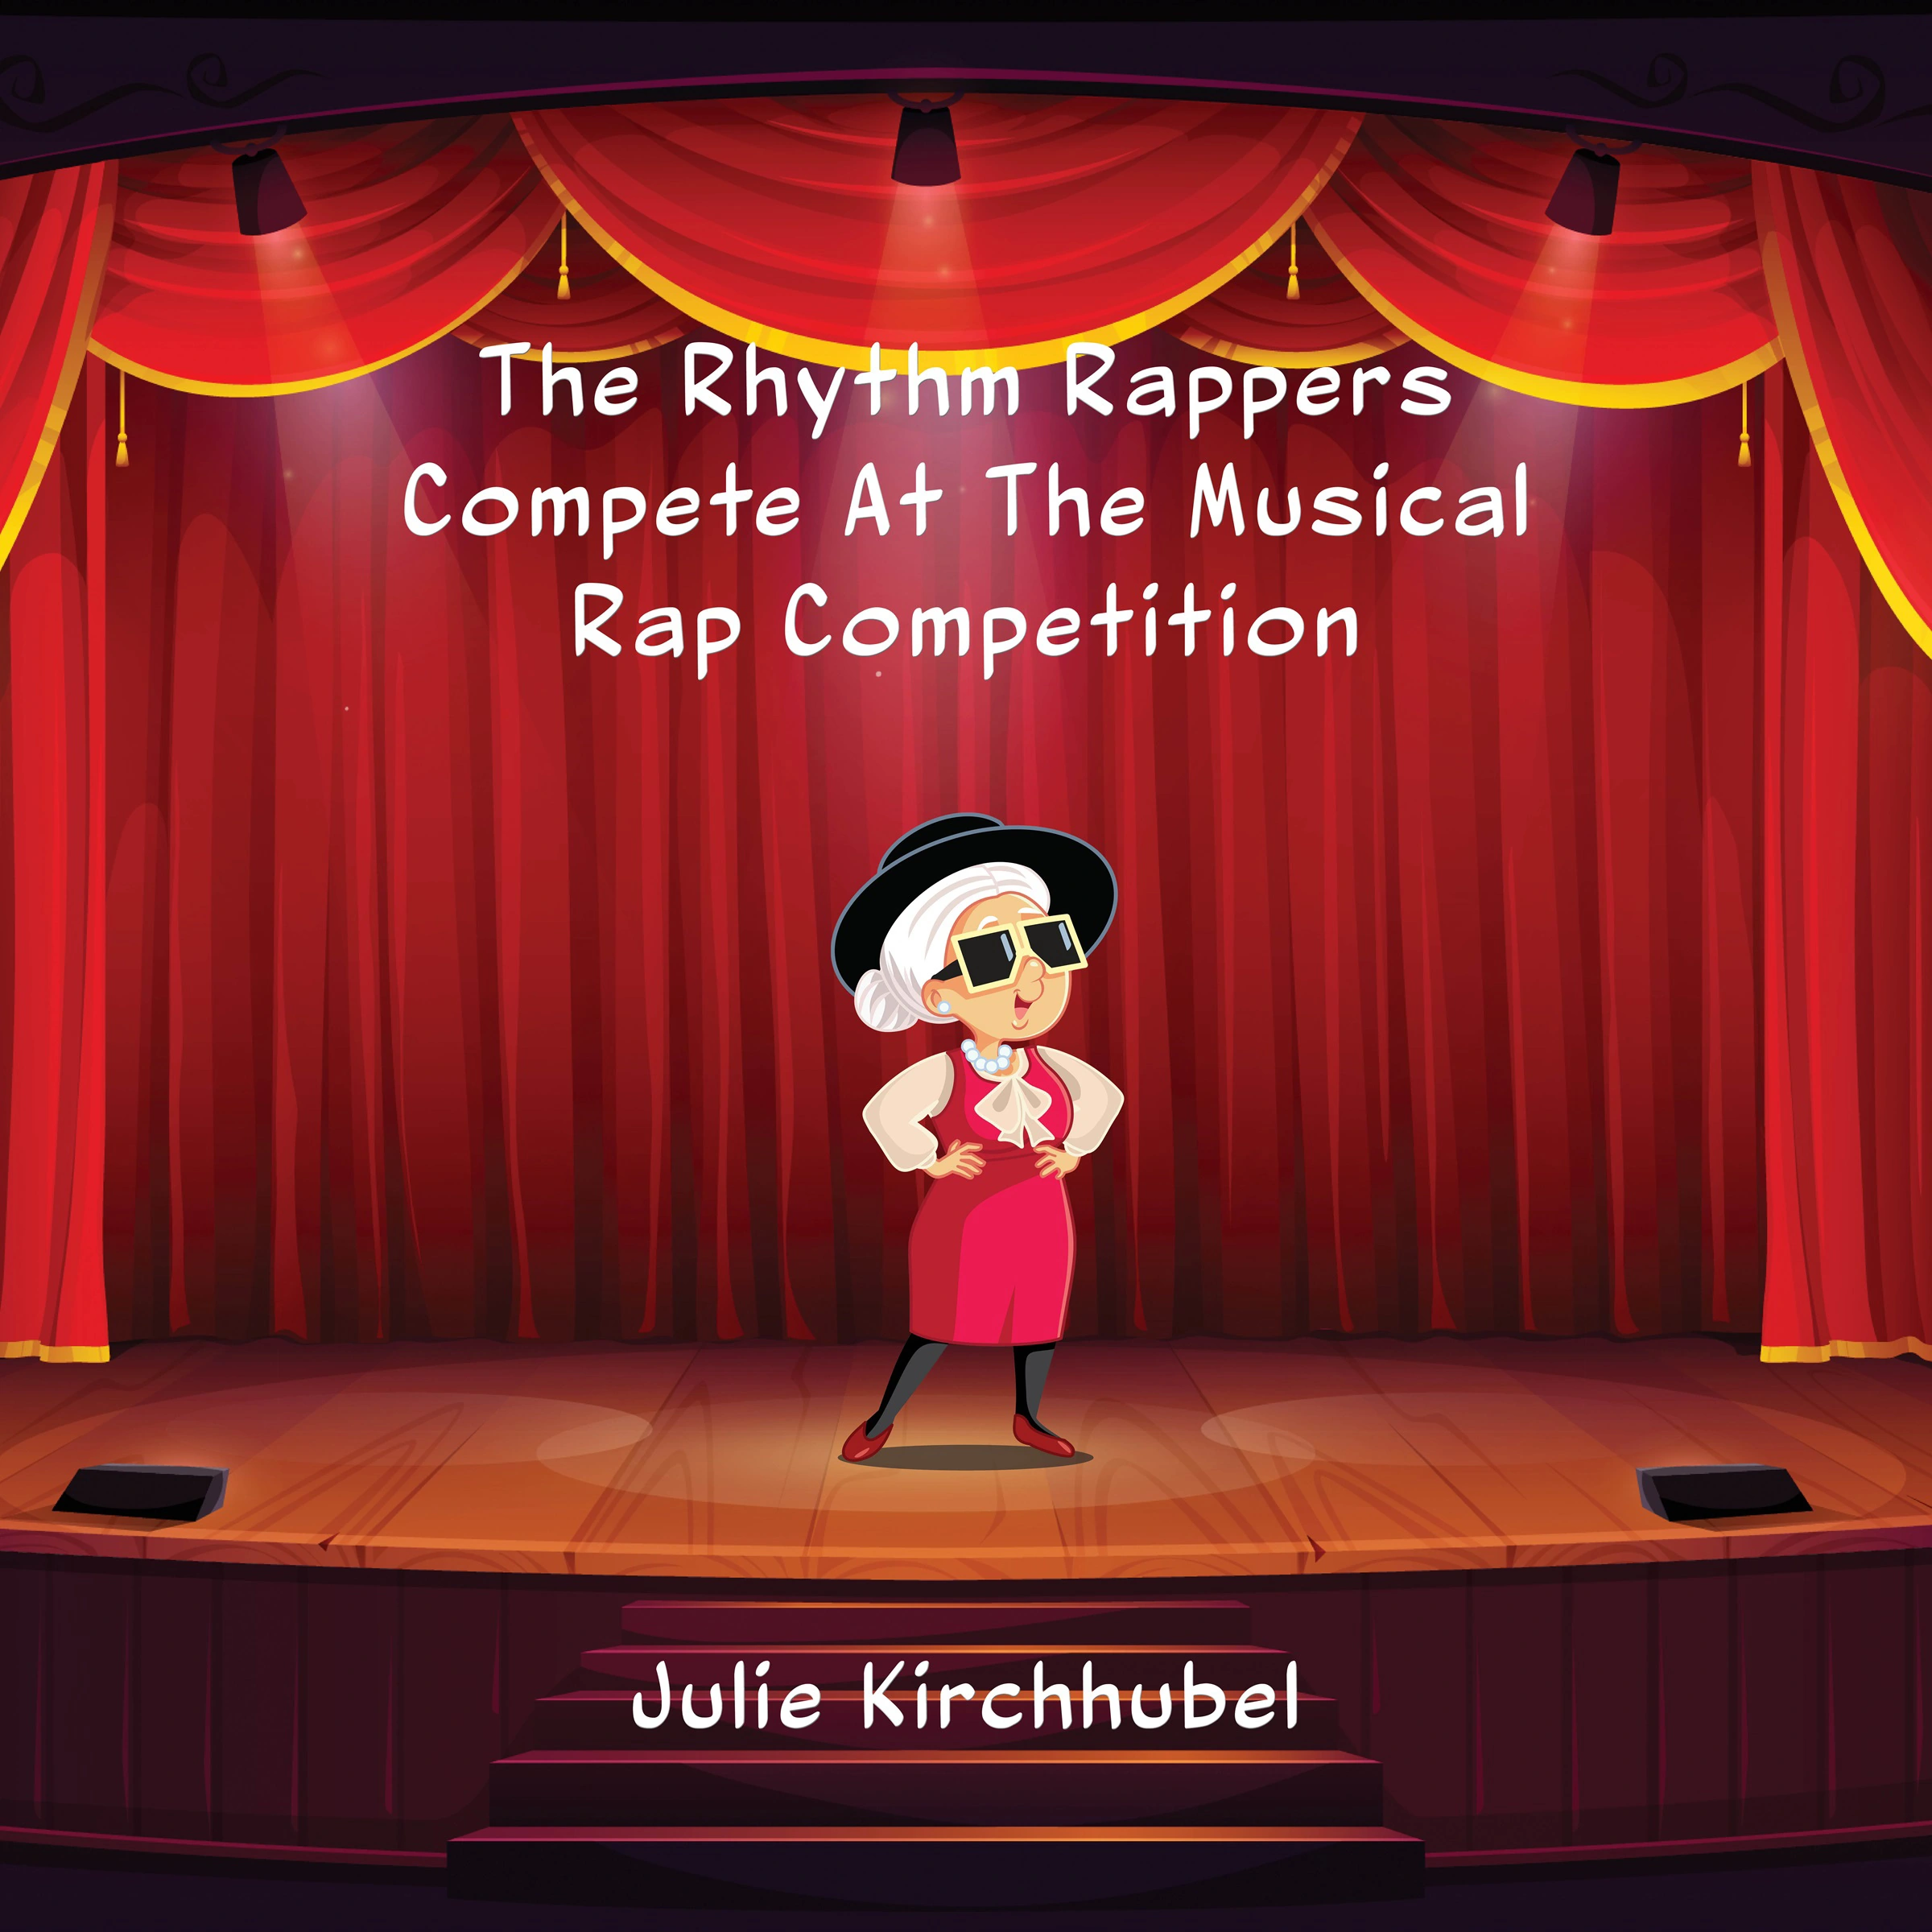 The Rhythm Rappers Compete At The Musical Rap Competition by Julie Kirchhubel Audiobook